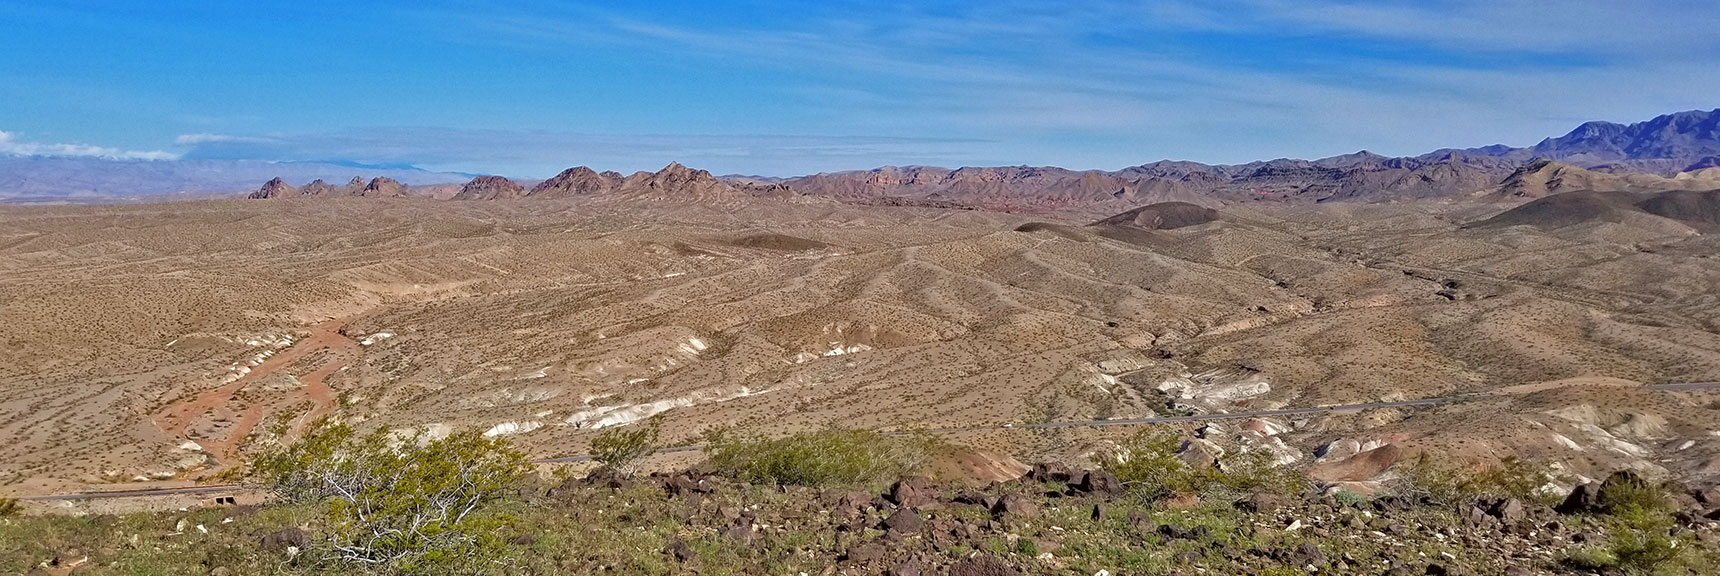 View North Toward Muddy Mountains From Black Mesa in Lake Mead National Recreation Area, Nevada